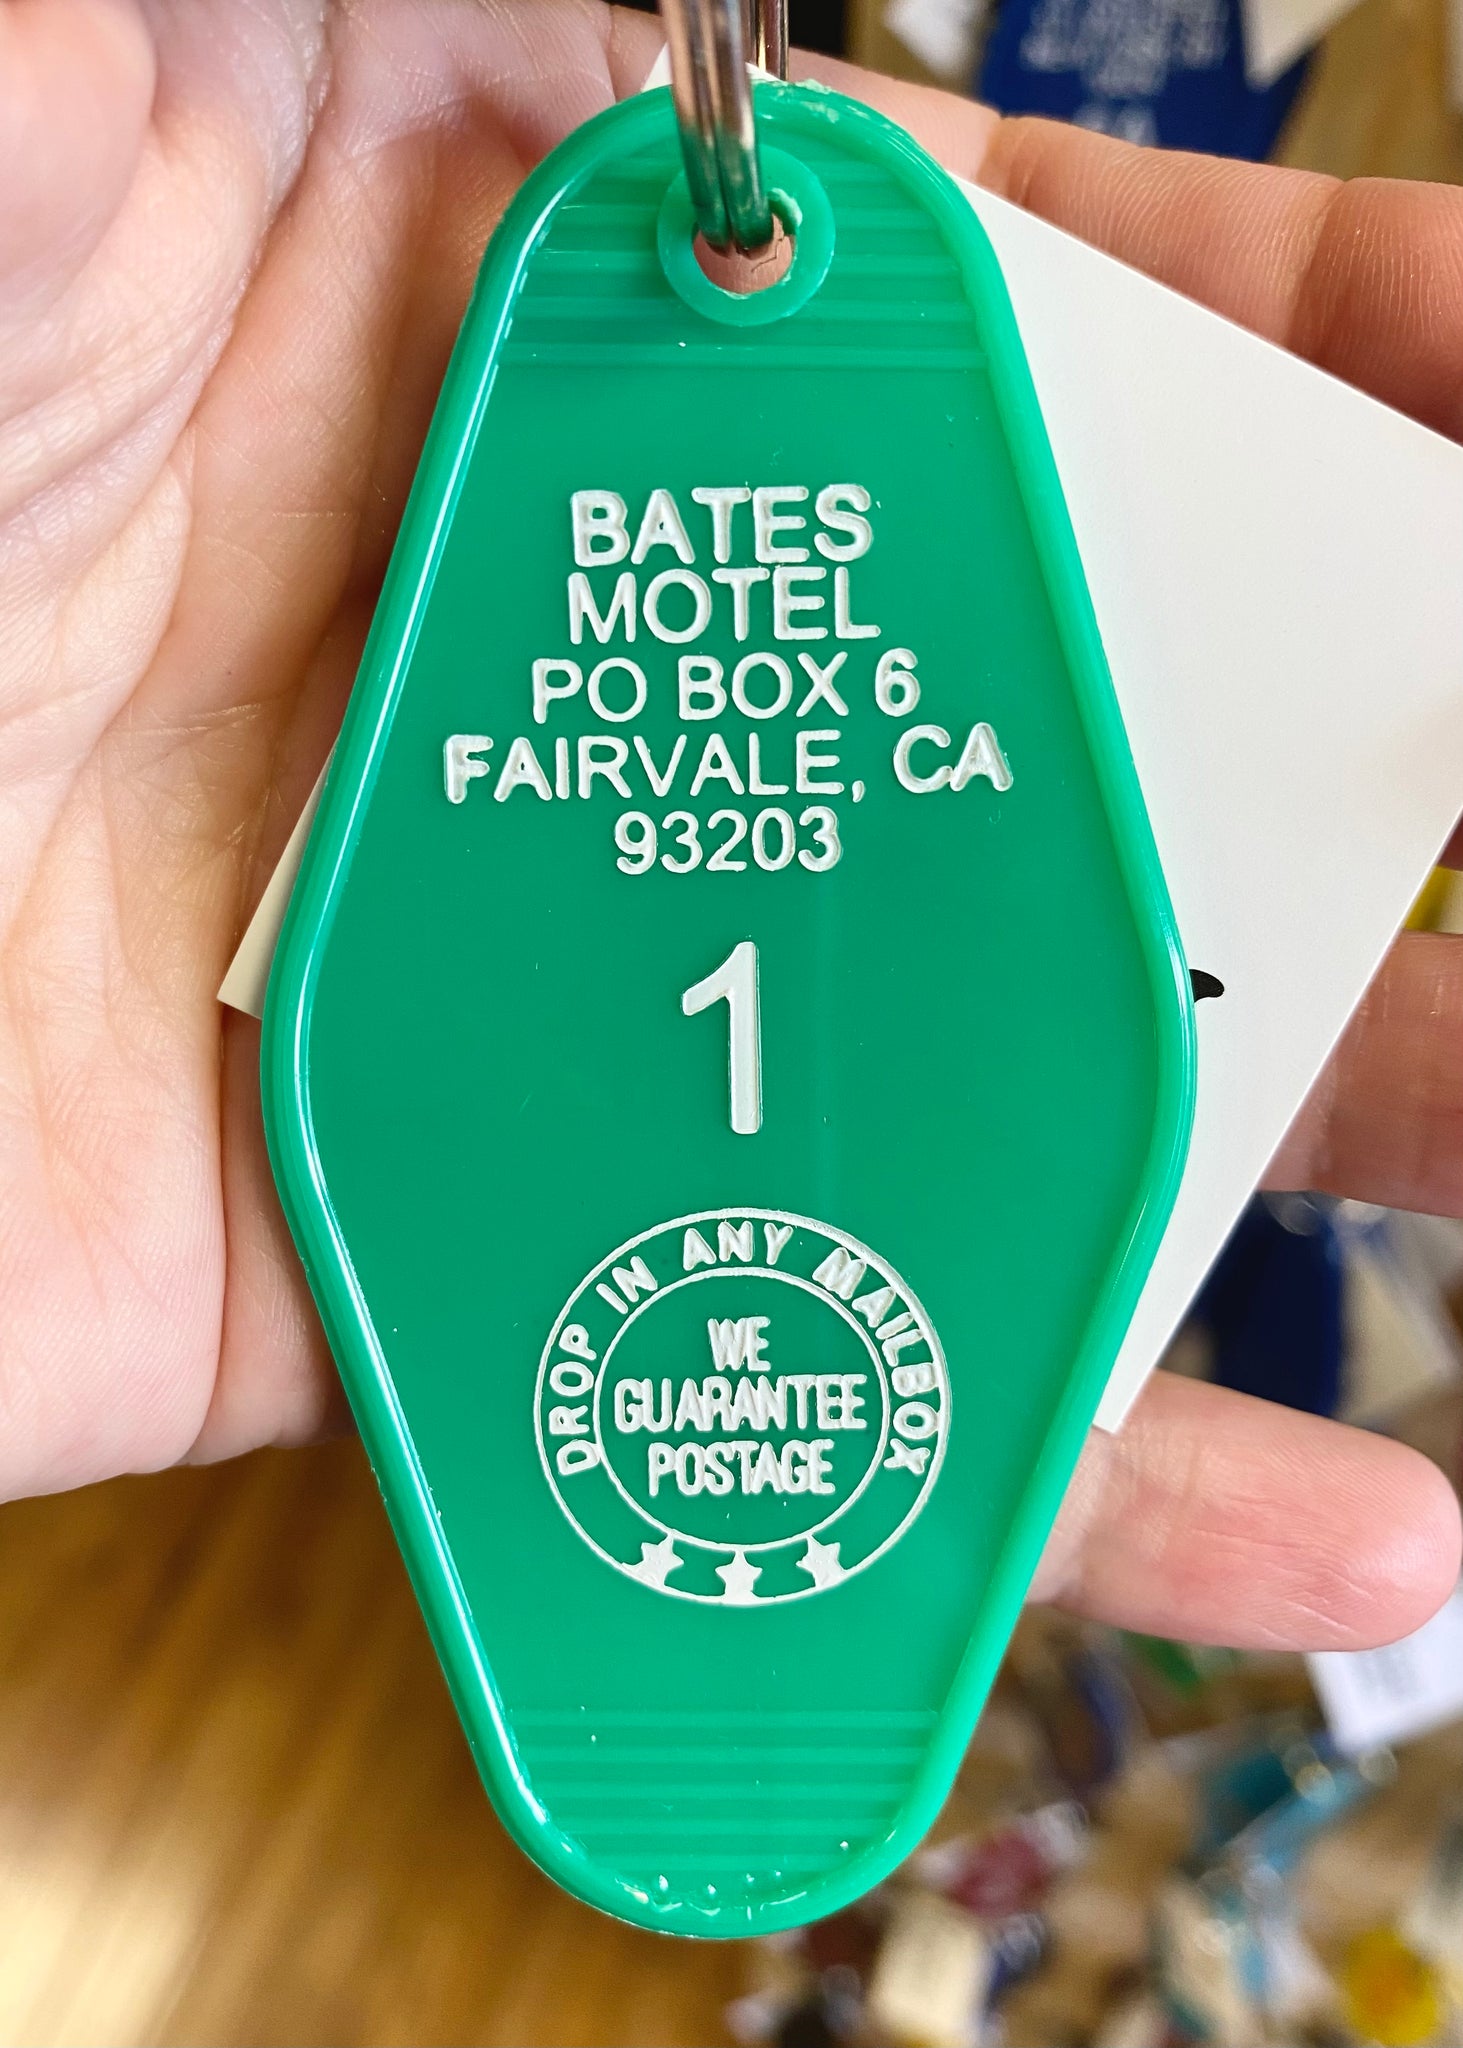 Vintage retro style plastic motel keychain/key fob - Alfred Hitchcock's Psycho, Bates Motel Fairvale, CA Sold by Le Monkey House